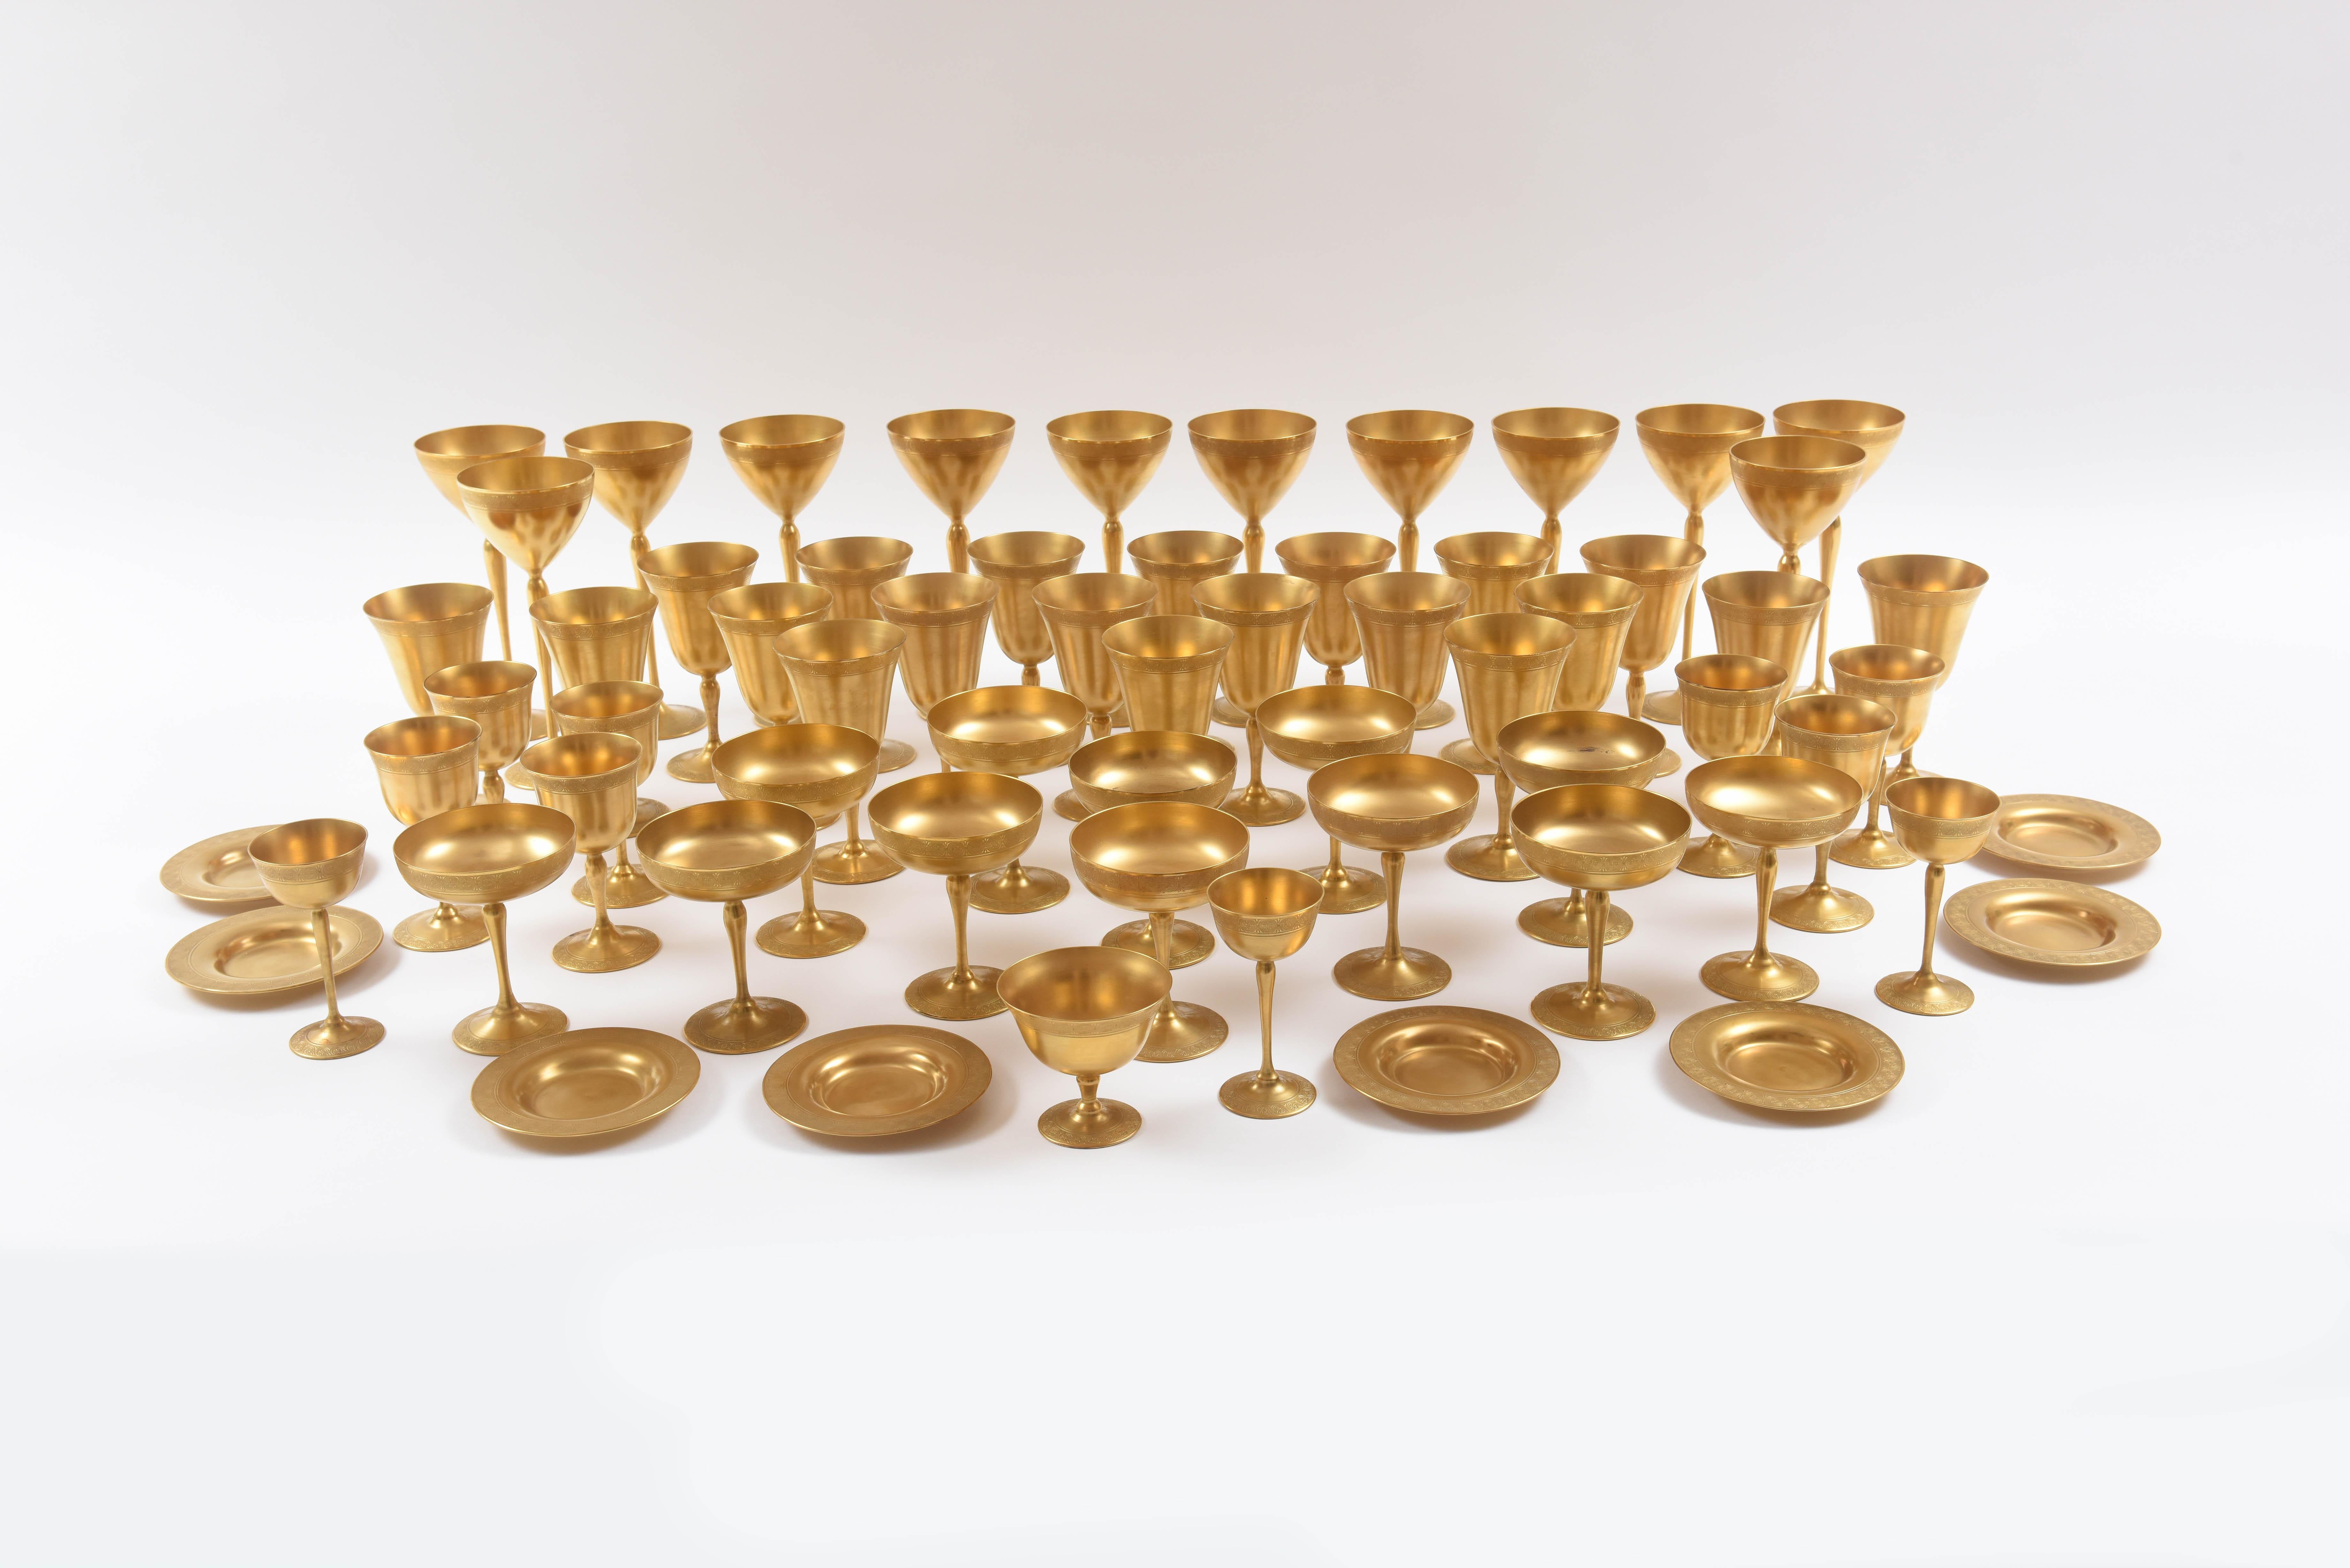 Hand-Crafted Extensive Rare Crystal Service for 12 With 24-Karat Gilt Encrusted. 63 Pieces